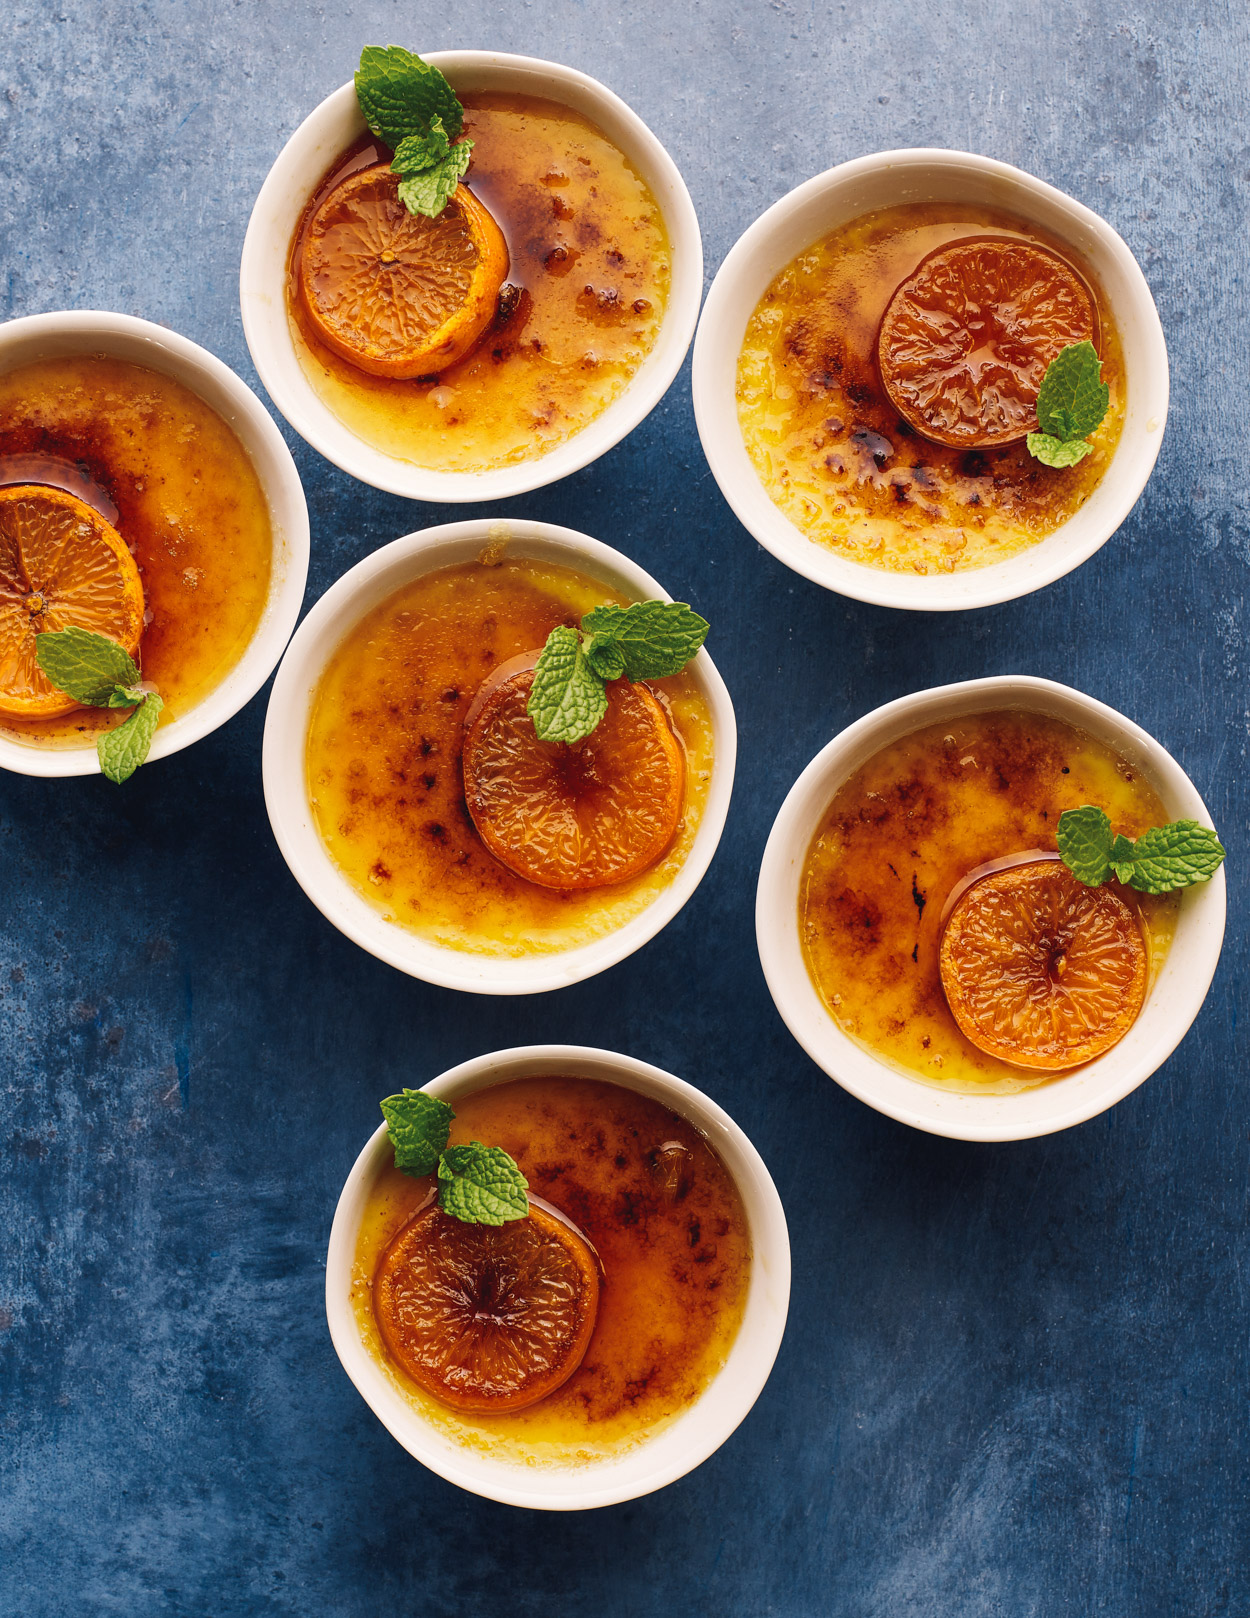 Los Angeles Food photographer - Cooking in Season Cookbook Creme Brulet  by Ray Kachatorian